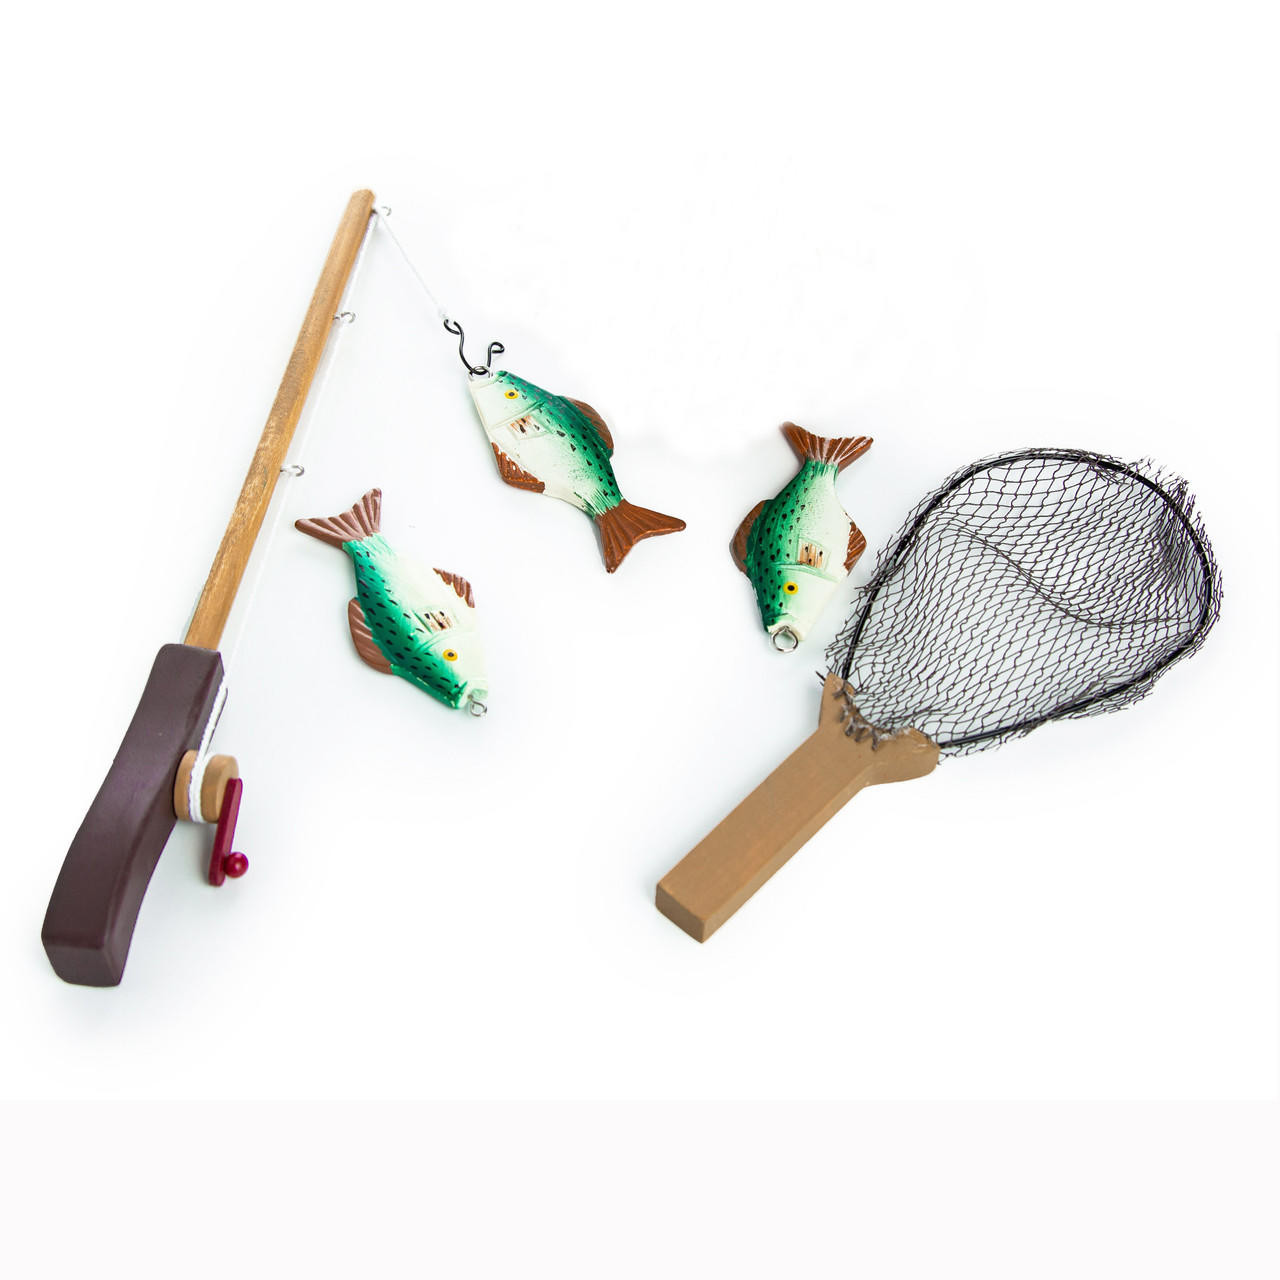 Accessories - Fishing